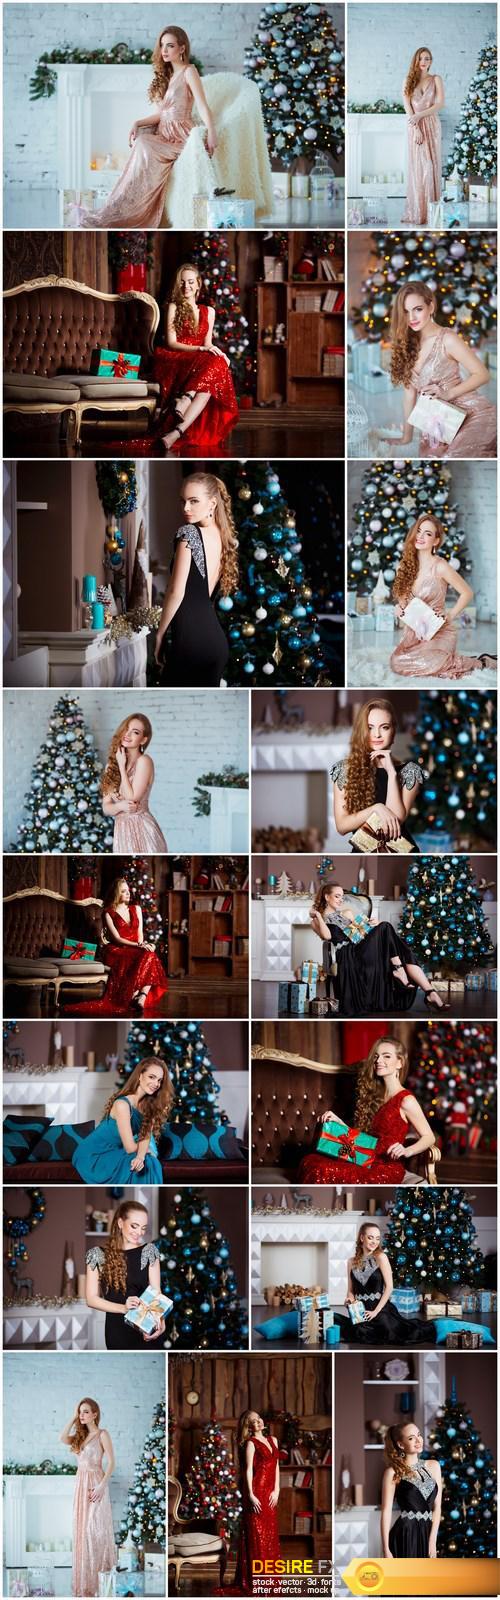 Young woman in elegant dress over christmas interior background 2 - 17xUHQ JPEG